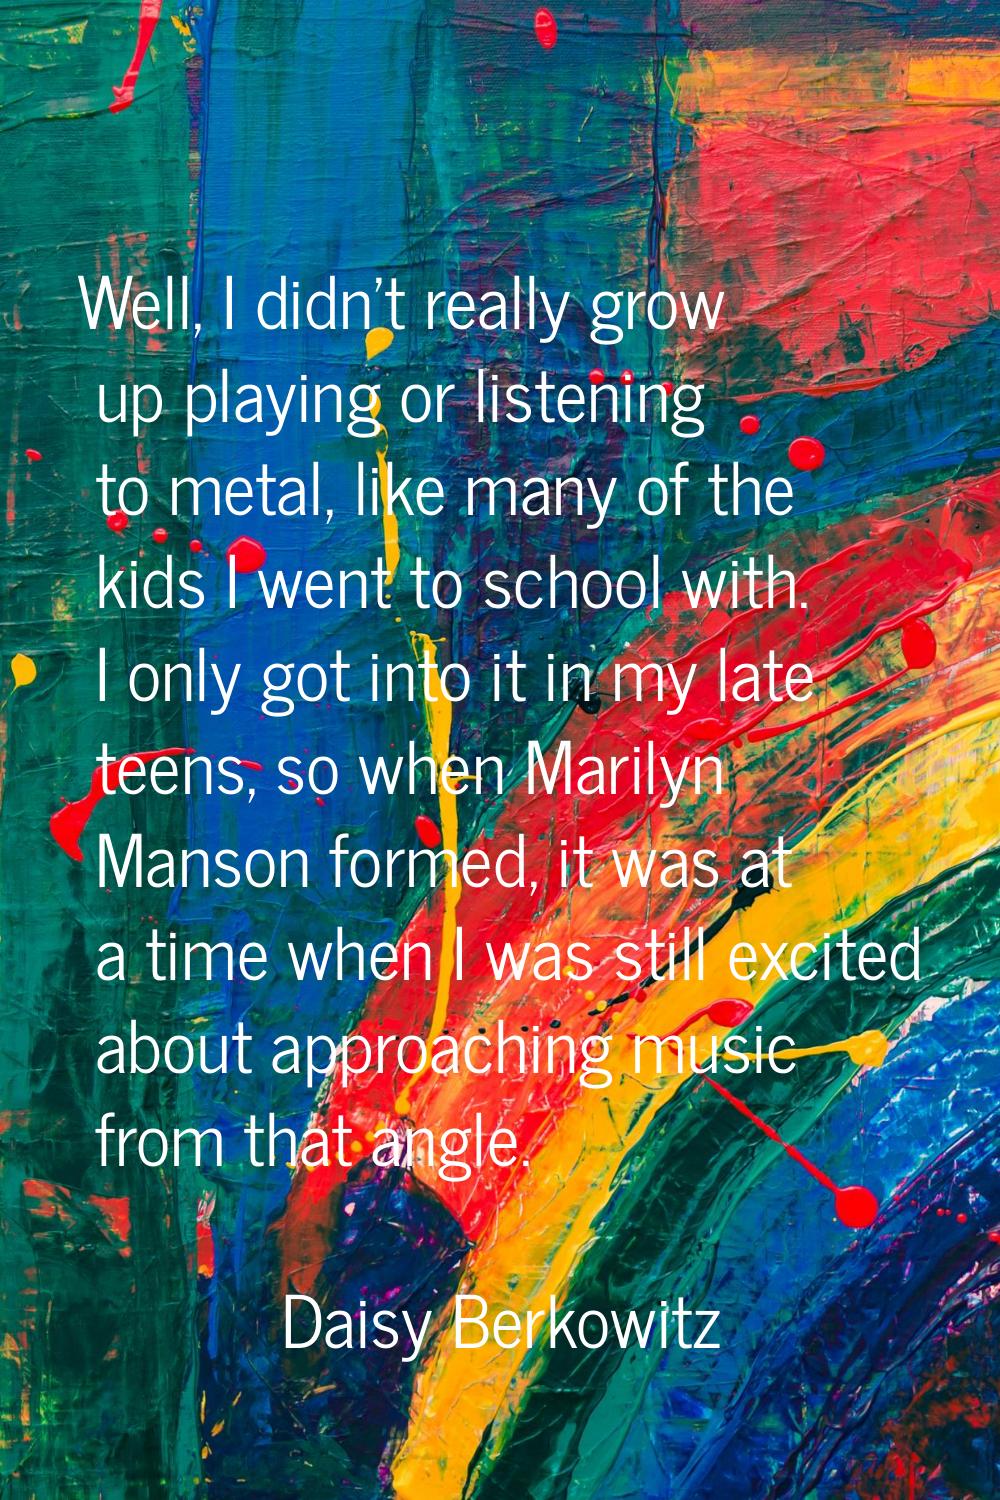 Well, I didn't really grow up playing or listening to metal, like many of the kids I went to school